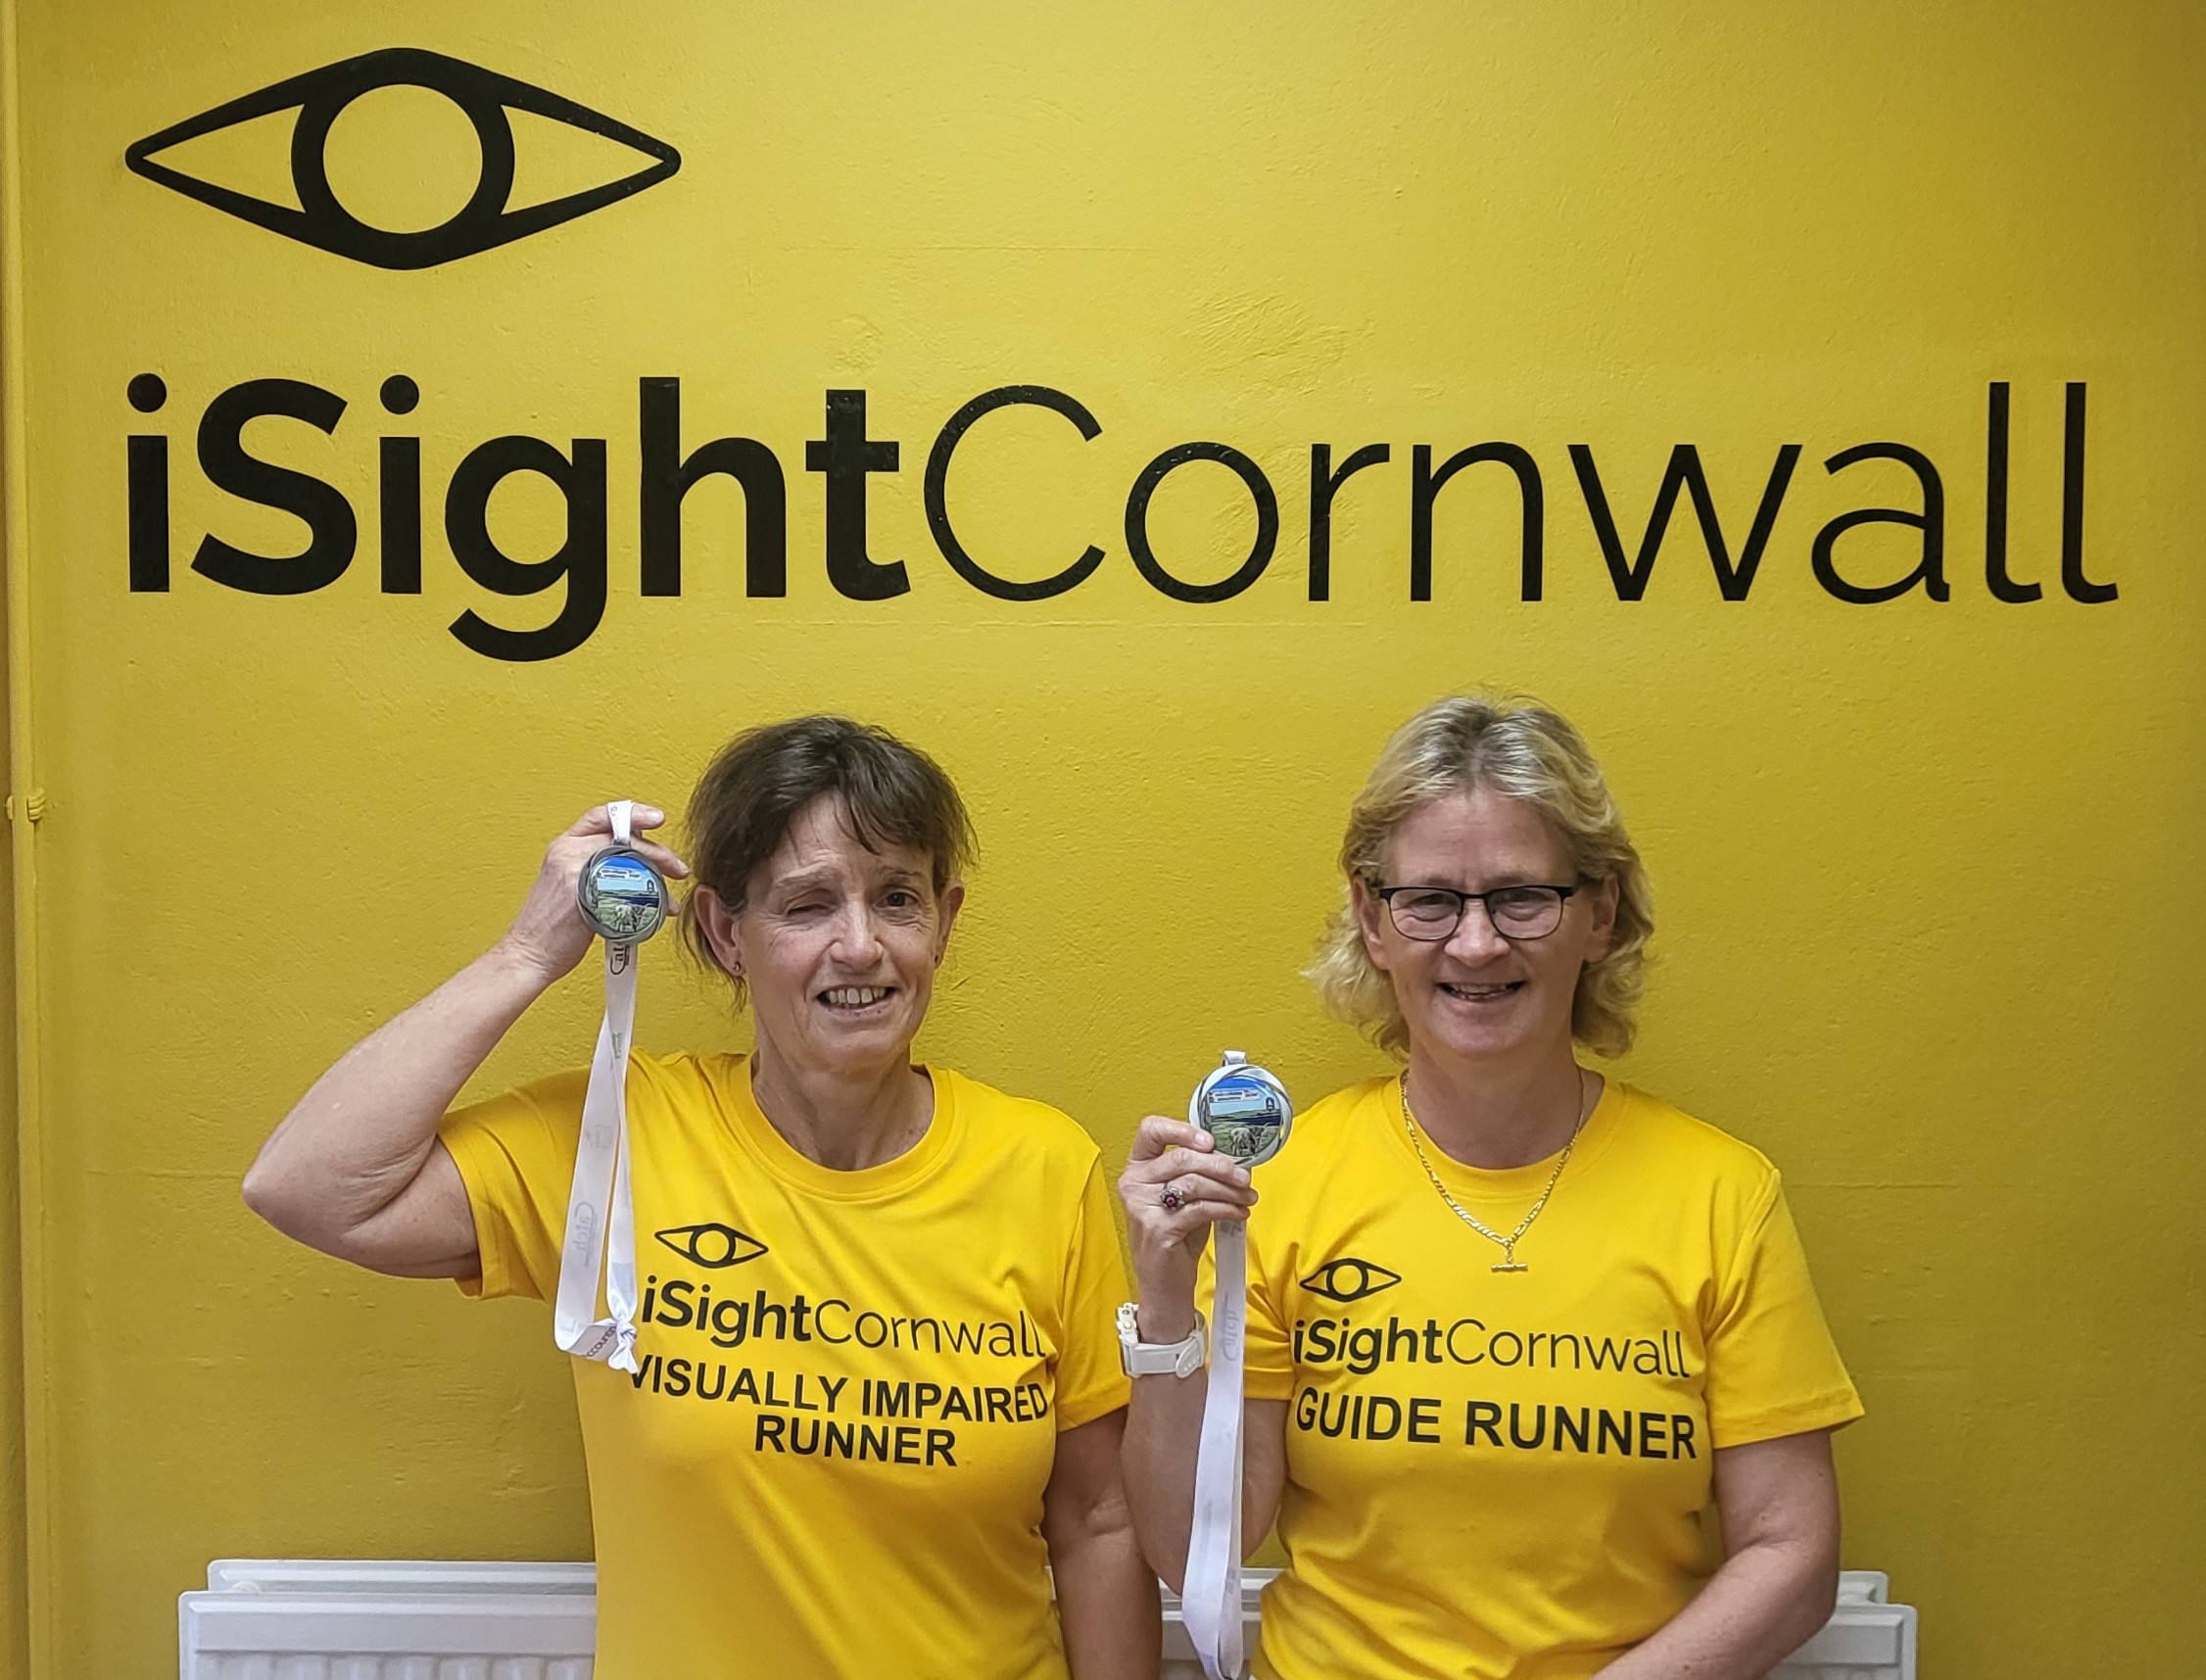 Image showing two women posing underneath a large iSightCornwall logo printed on the wall. They are both wearing bright yellow t-shirts which also have the iSightCornwall logo on, one says visually impaired runner and the other says guide runner. Both women are holding up medals next to their head and smiling.